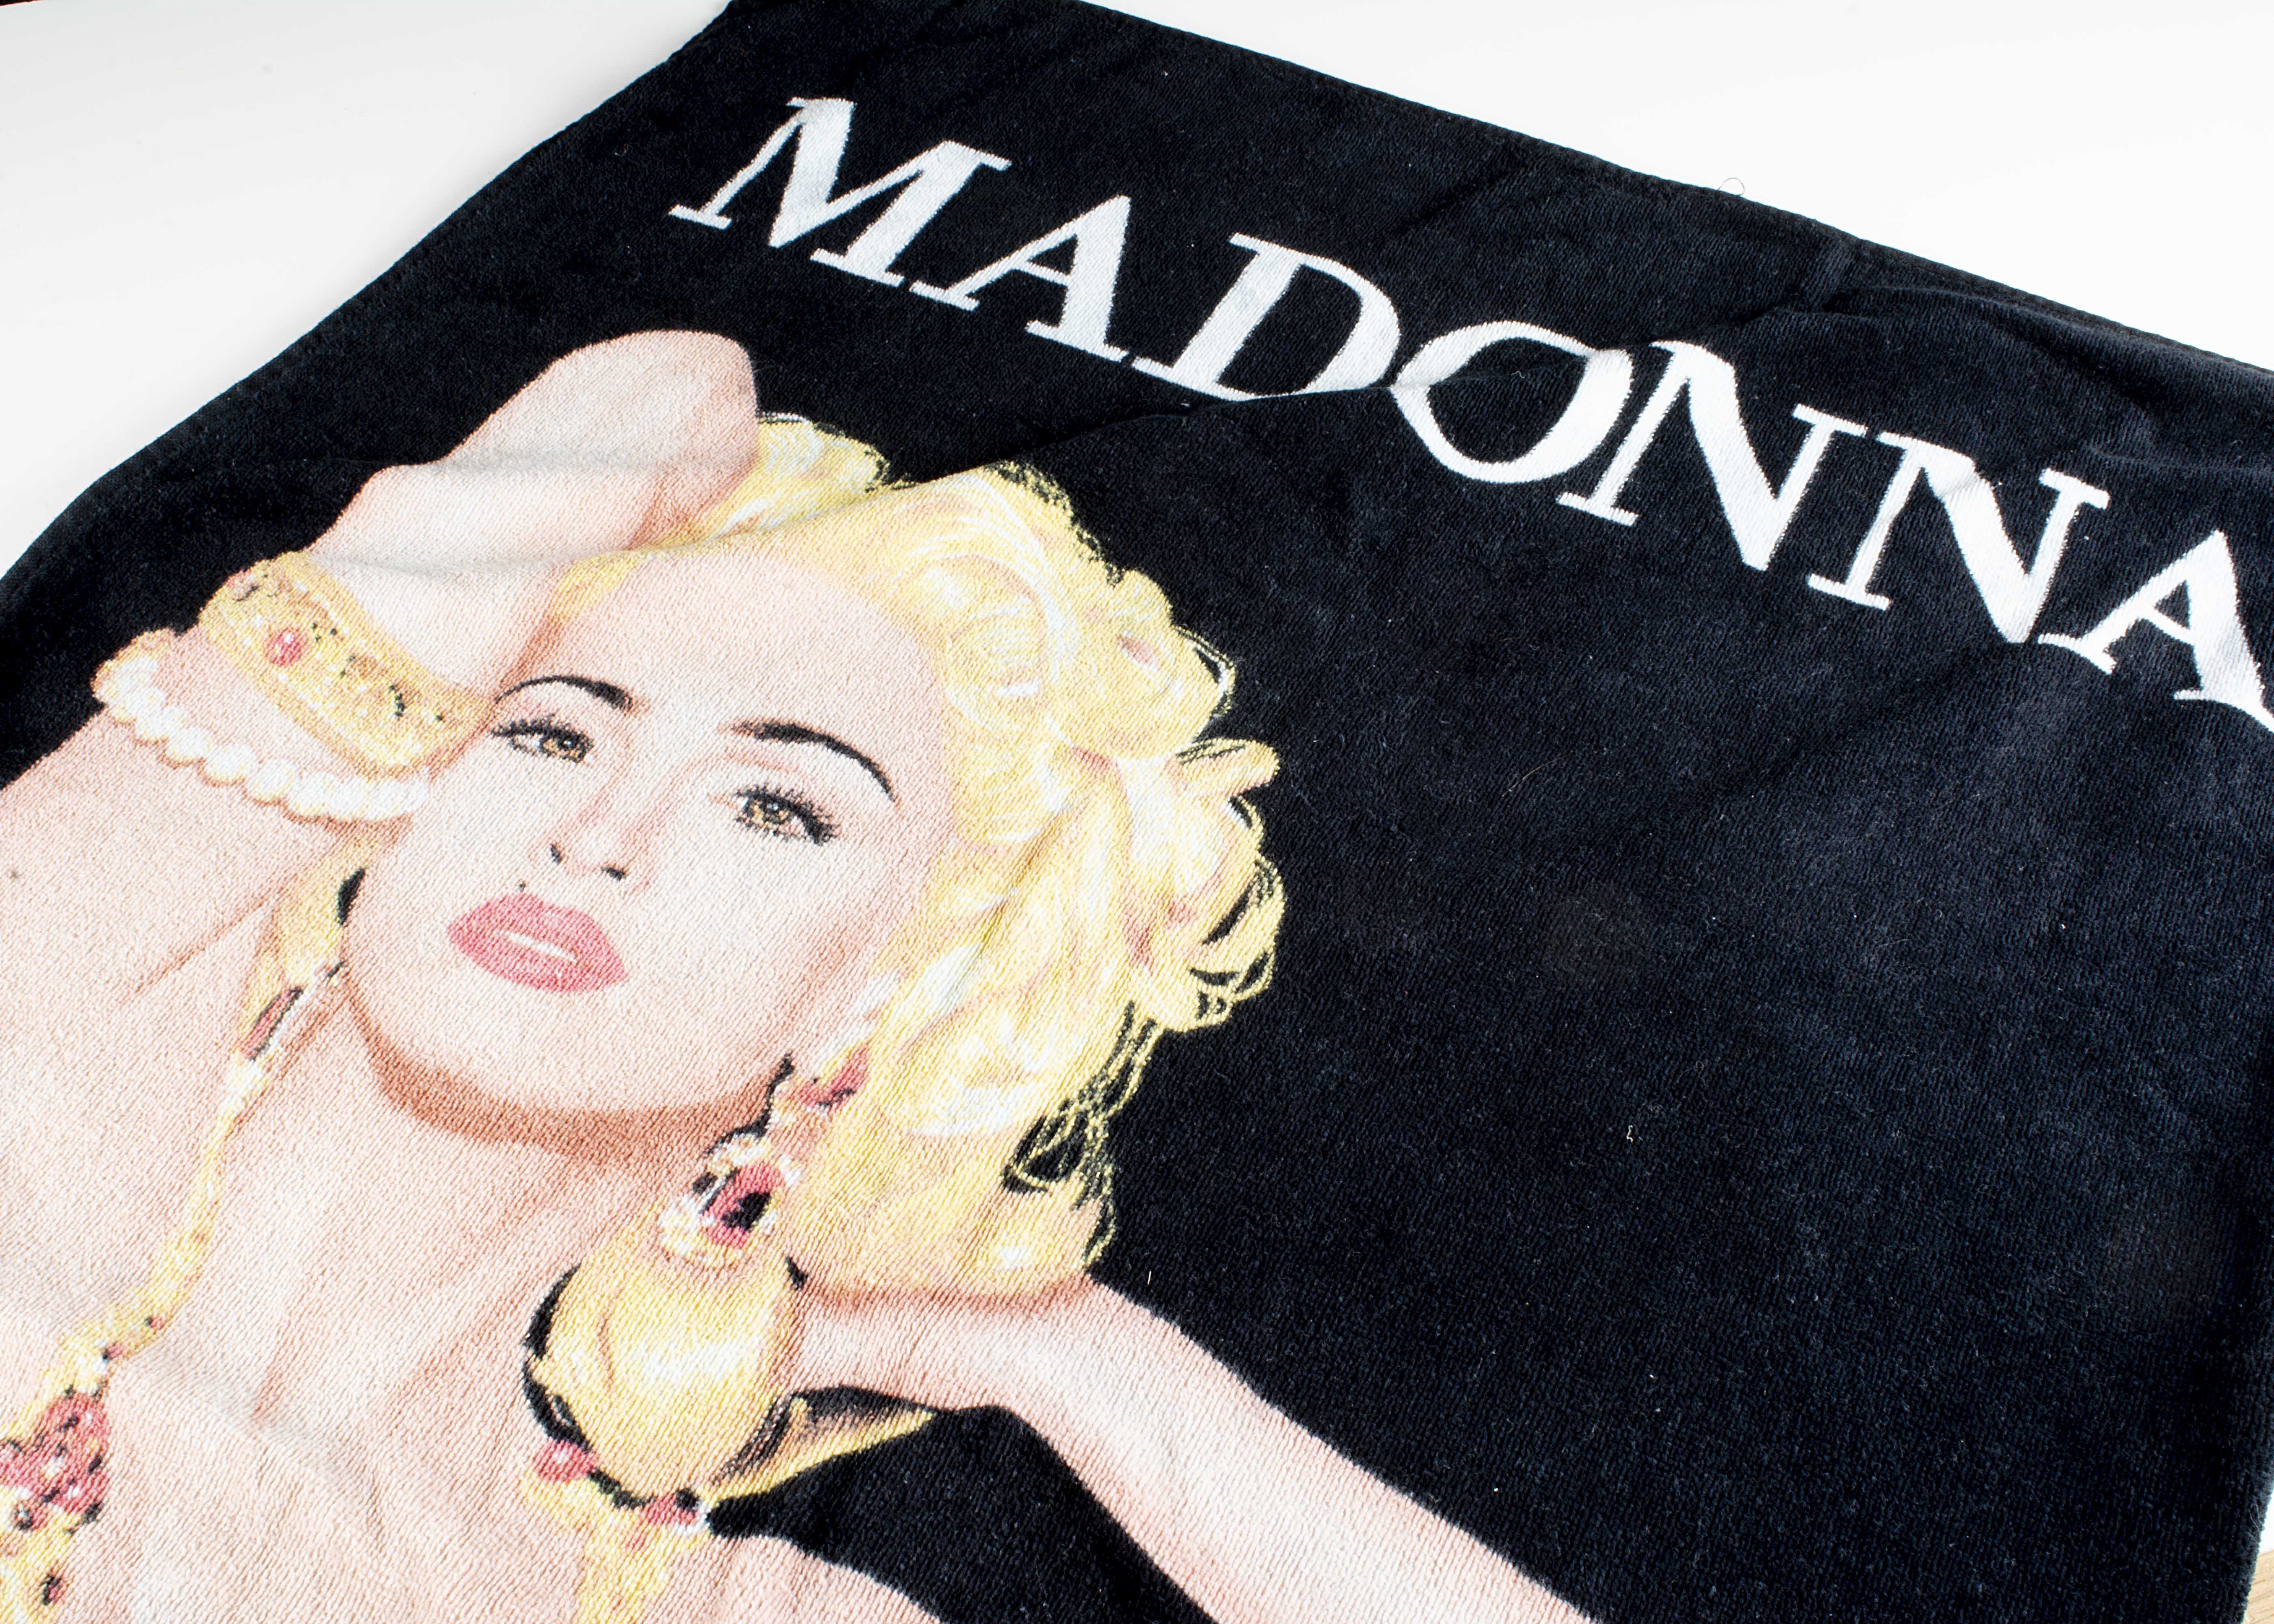 Madonna Erotica Towel, 1993 Madonna 'Erotica' Towel by Boy Toy Inc. - measures 30" by 60" approx and